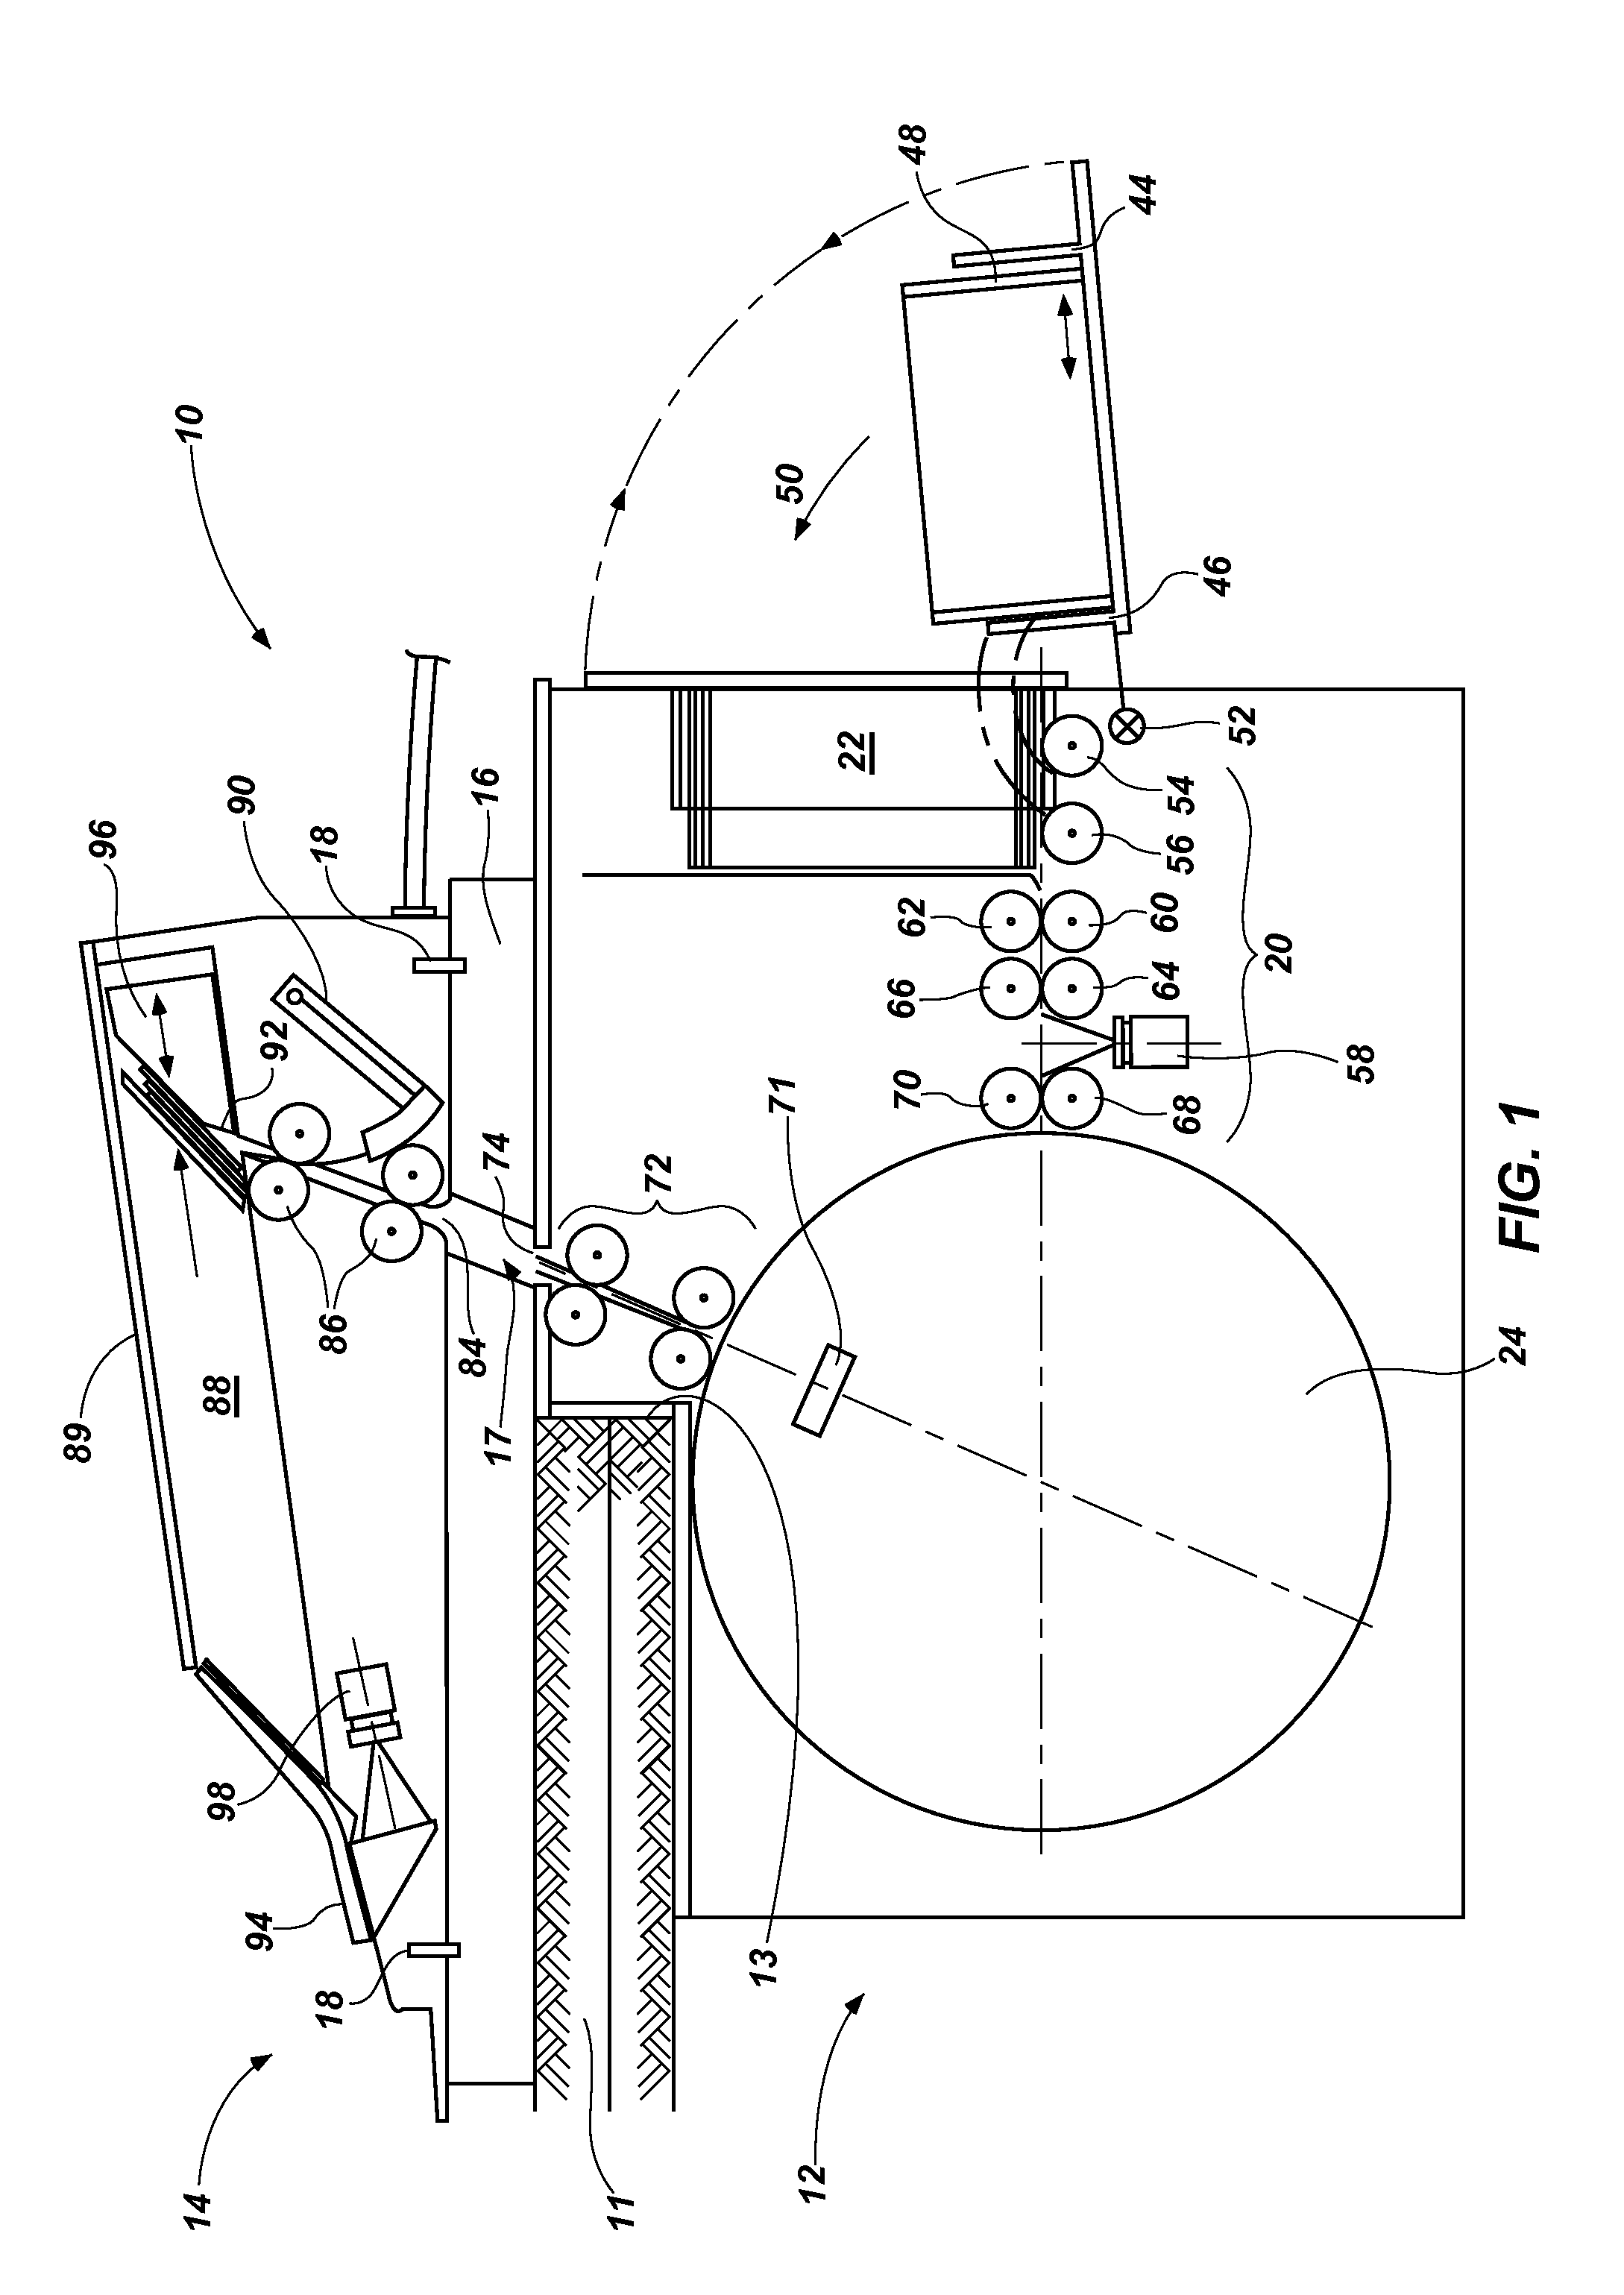 Card handling systems, devices for use in card handling systems and related methods